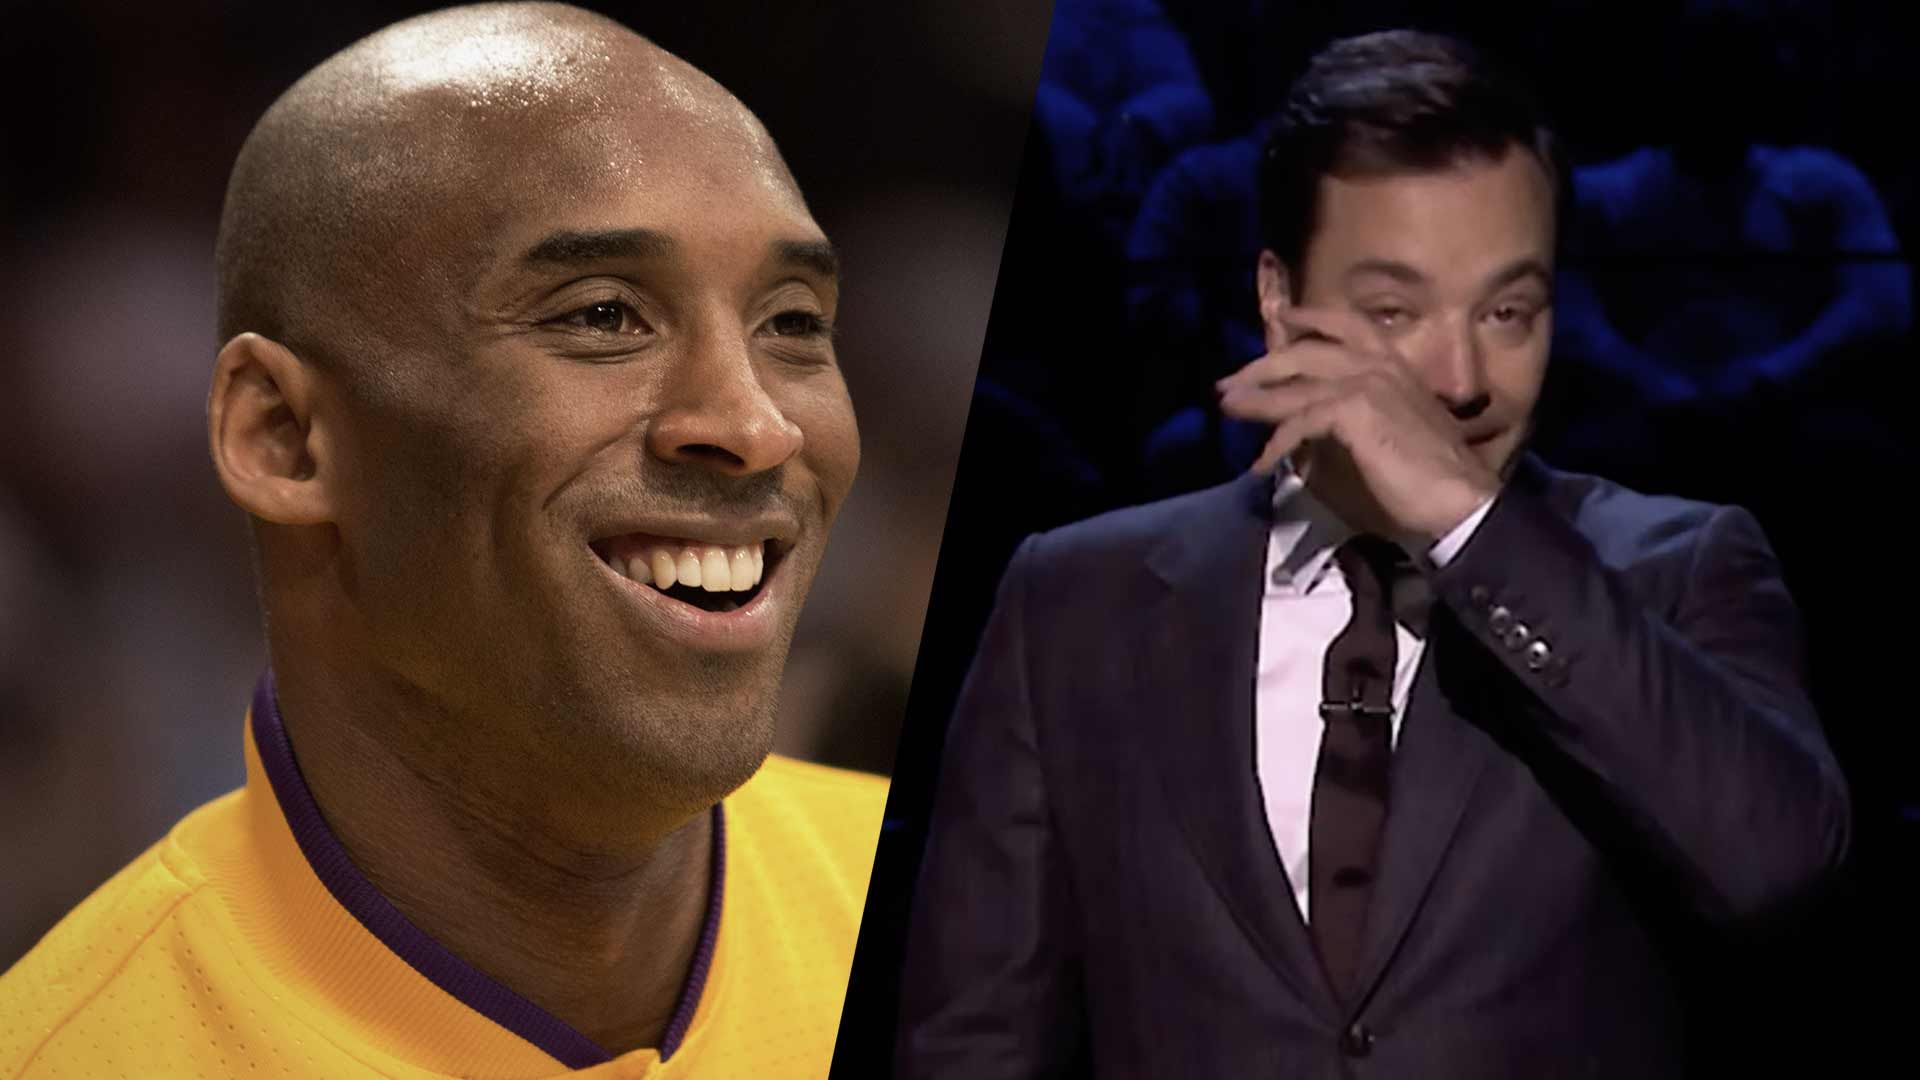 Jimmy Fallon Tearfully Recalls Going On Beer Run With Kobe Bryant When They First Met1920 x 1080